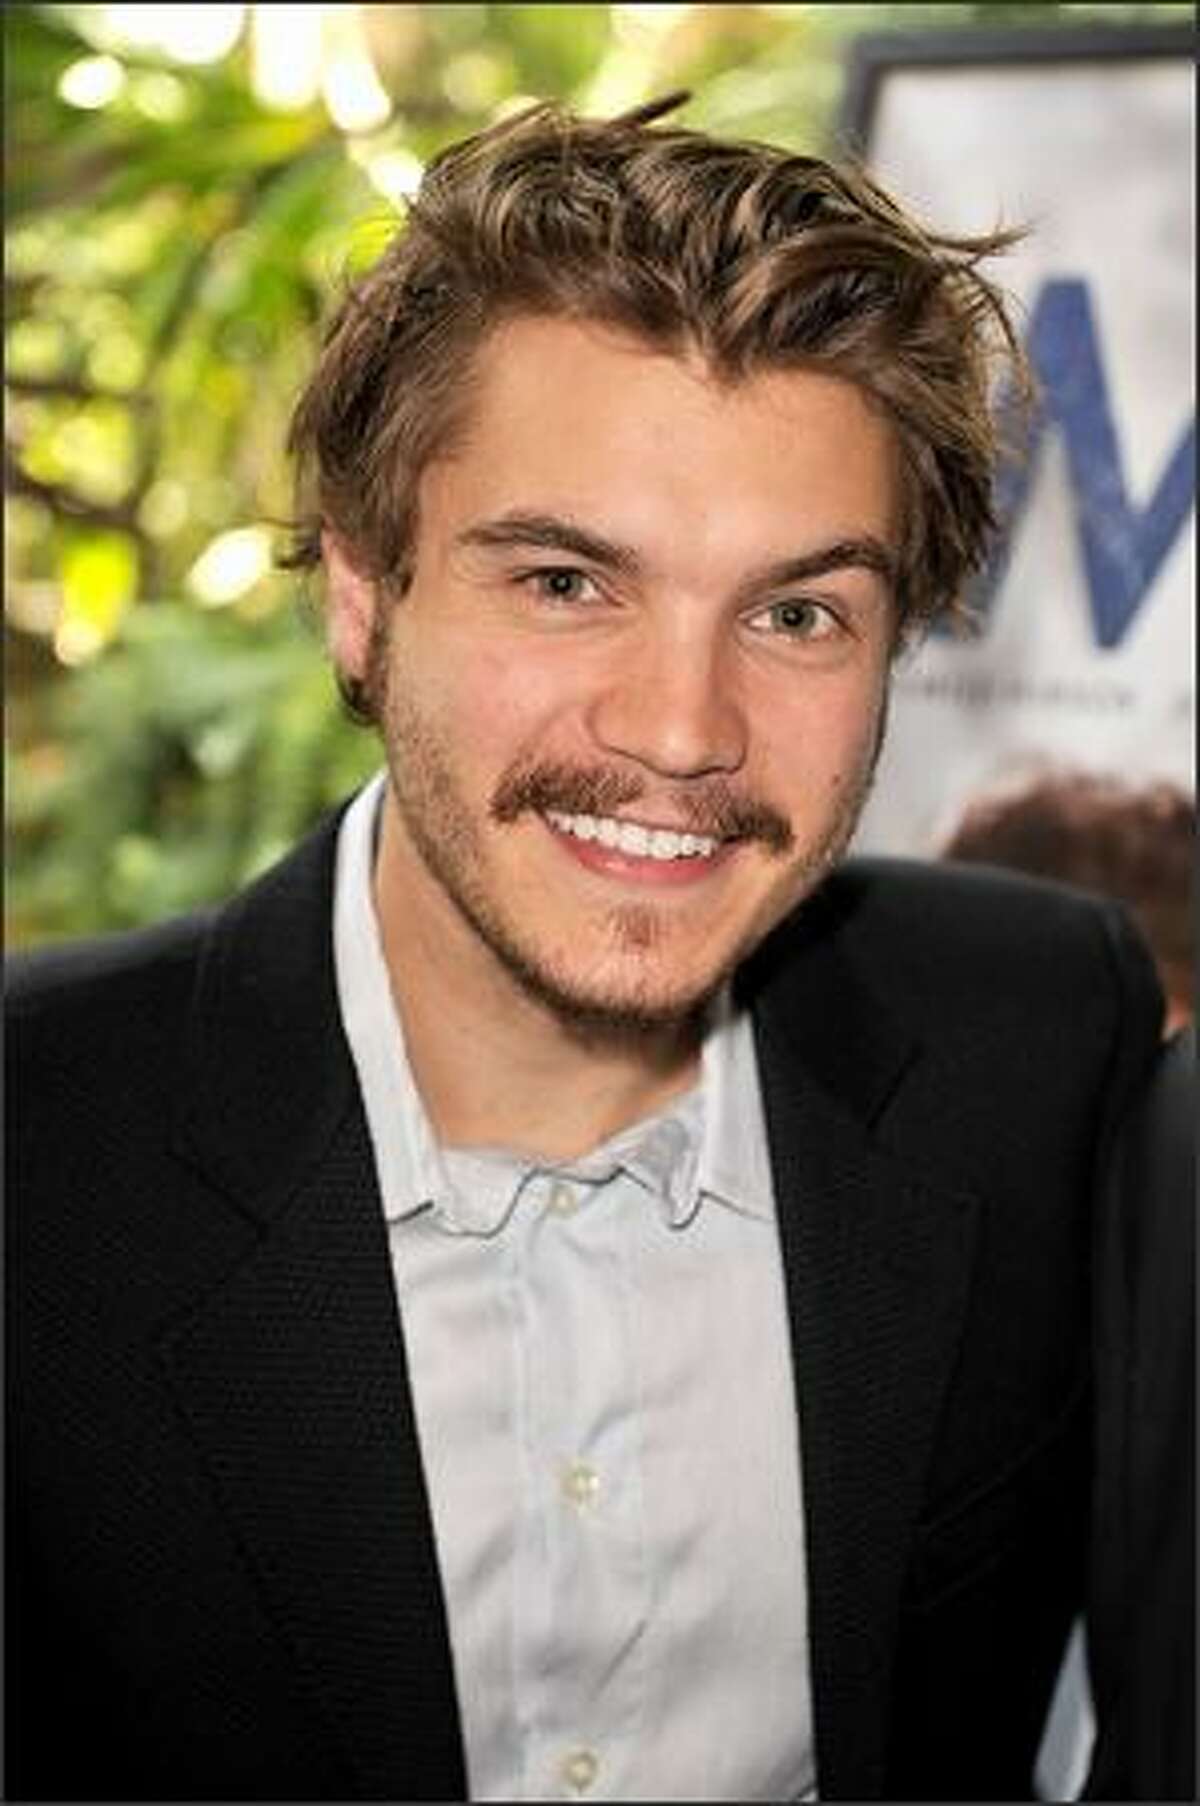 Actor Emile Hirsch arrives at the AFI Awards 2008 held at the Four Seasons Hotel in Los Angeles on Friday.